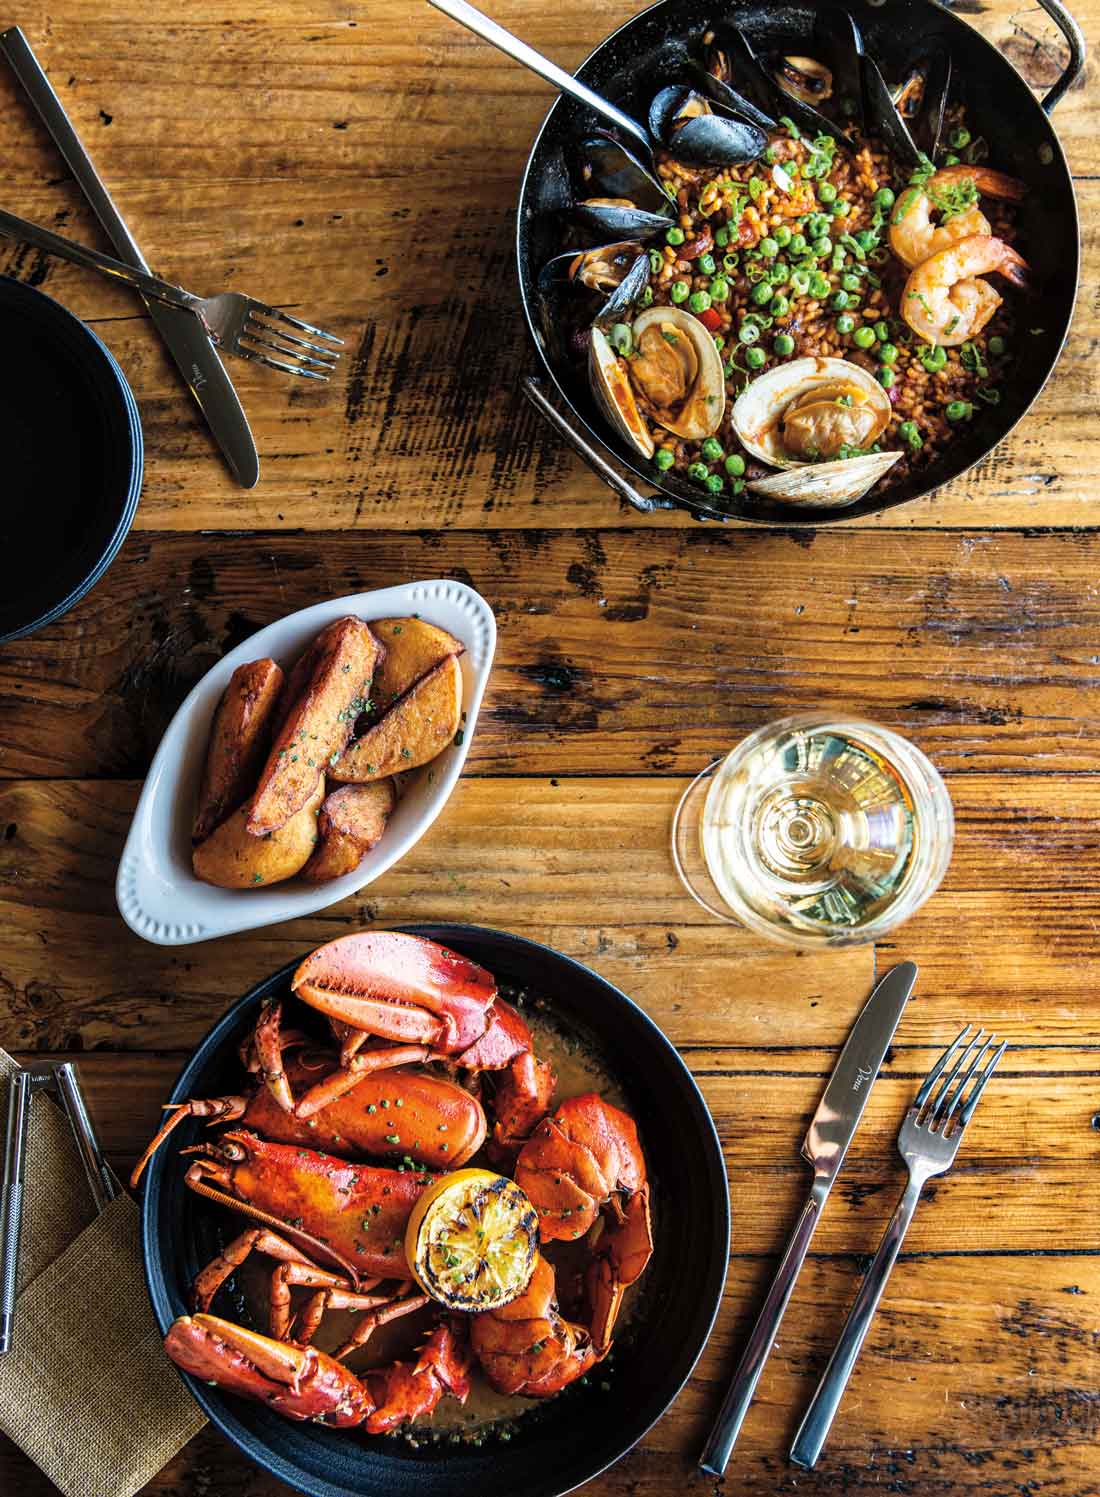 From Wiscasset's Water Street Kitchen & Bar: paella with Maine mussels and littlenecks; roasted lobster with whiskey- tarragon butter; truffle fries